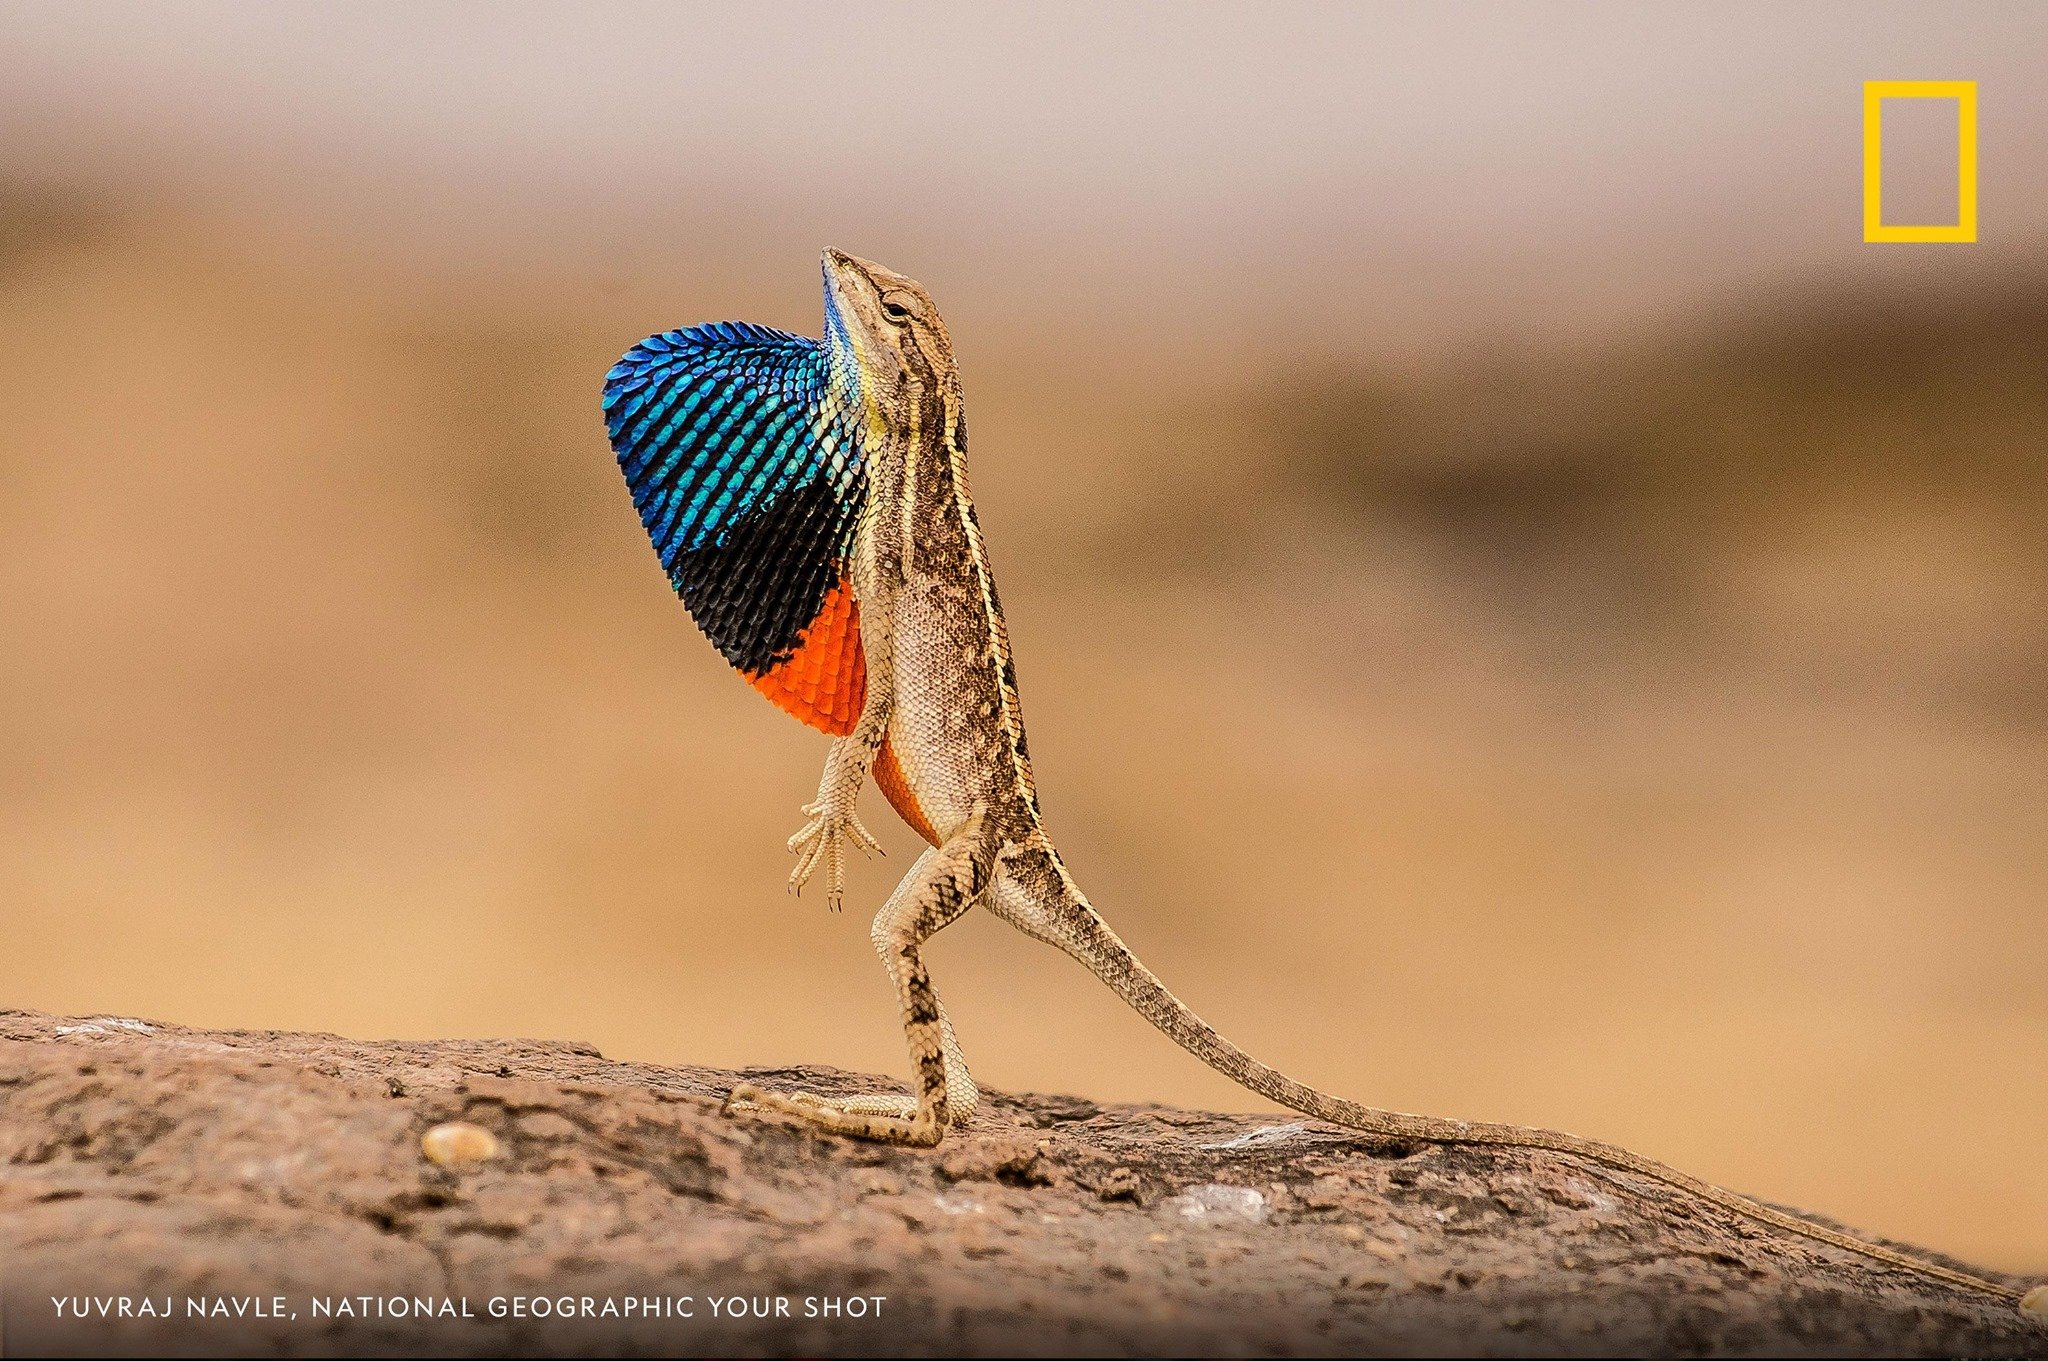 Leaping lizards, it's World Lizard Day! Don't miss your chance to celebrate these cold-blooded creatures. https://on.natgeo.com/2KBwqj7